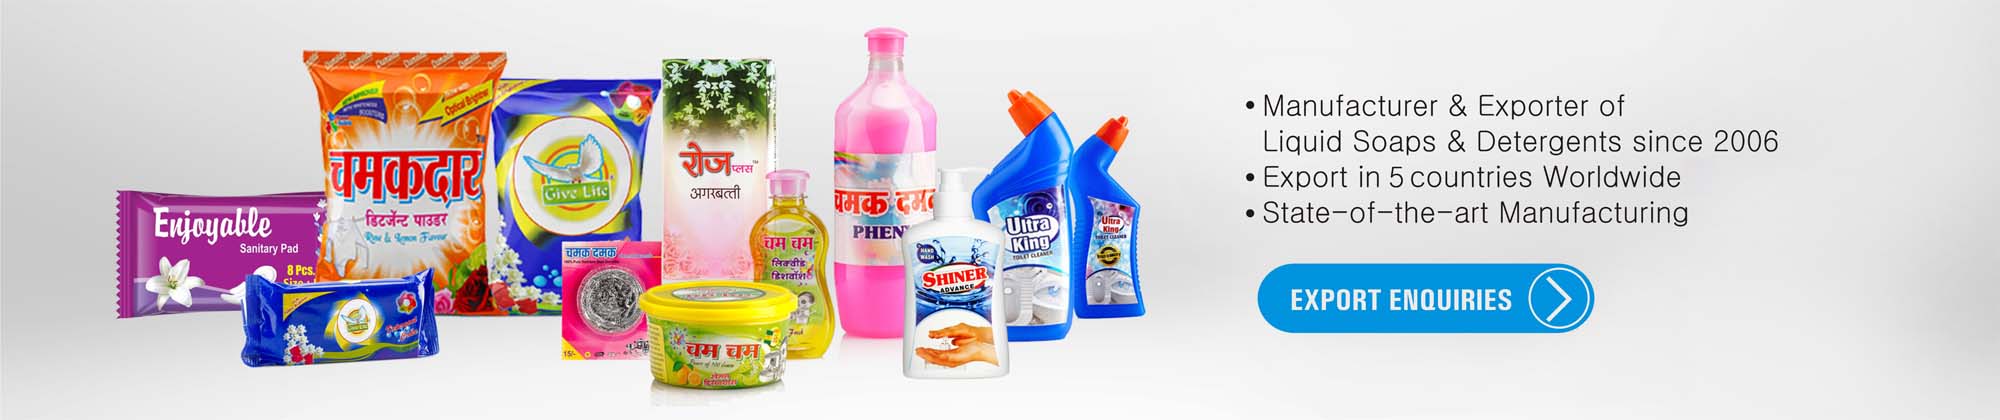 Indian Manufacturer, Exporter of Cleaning Products & Detergents